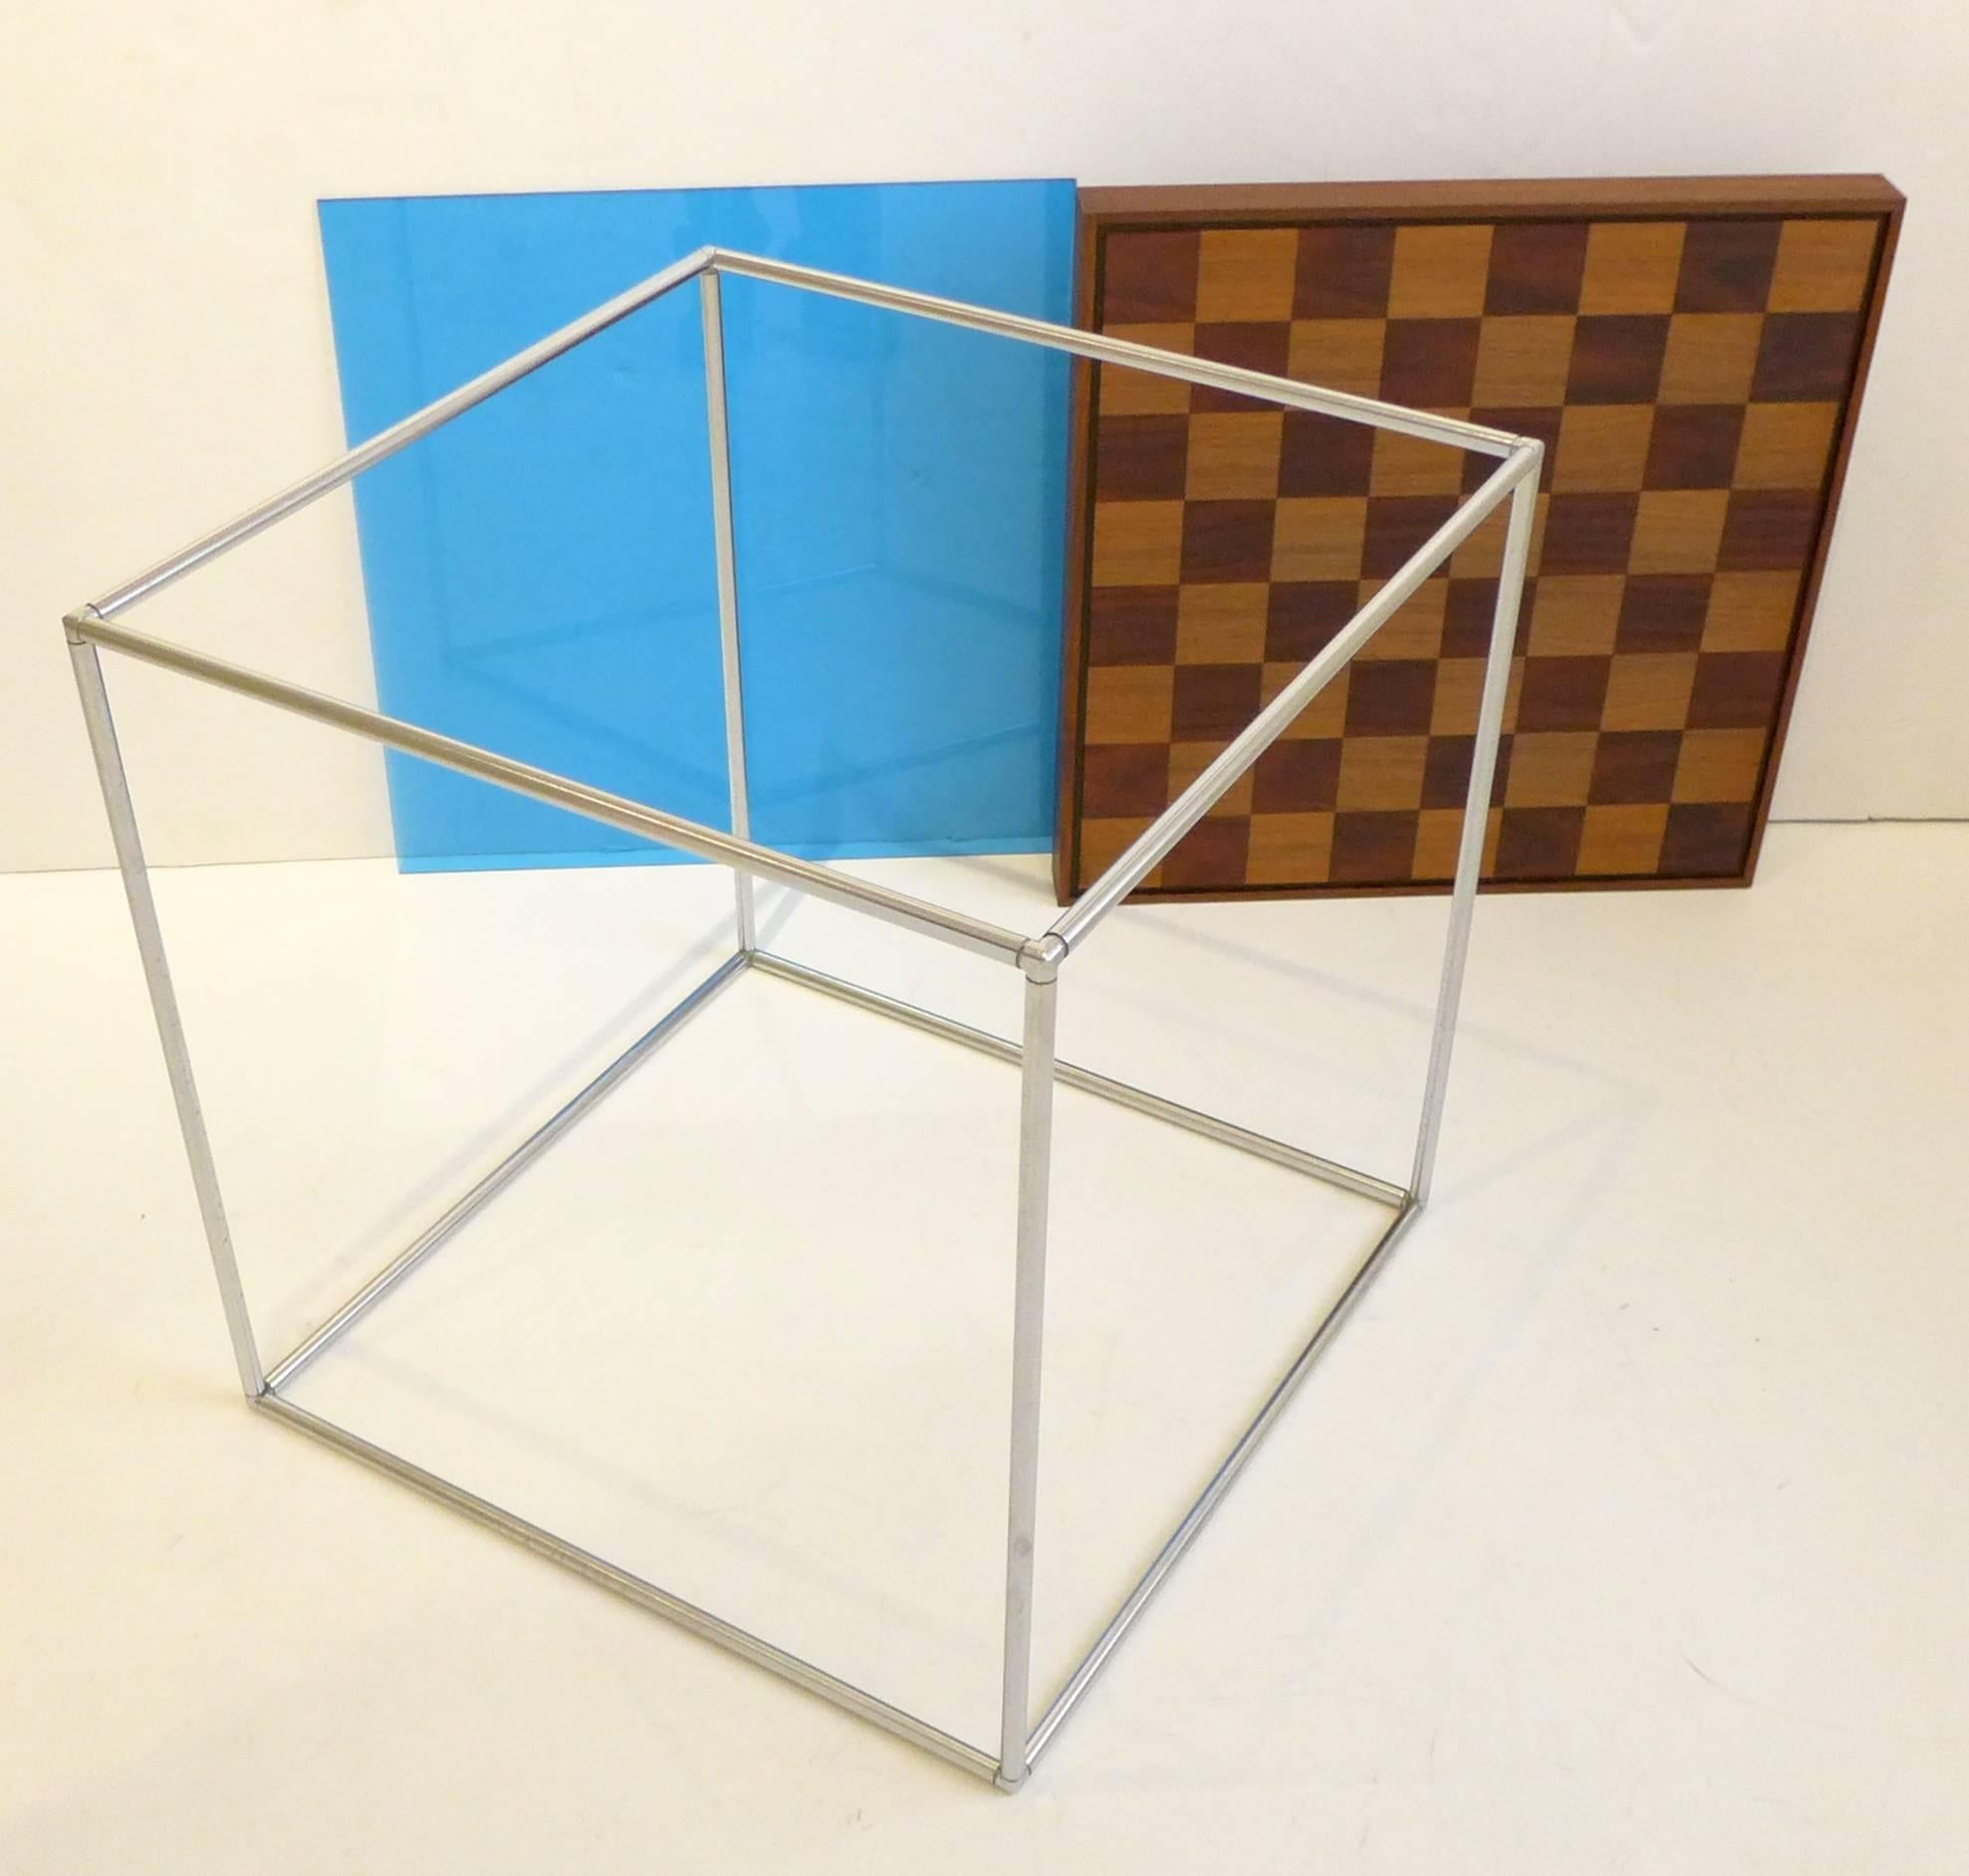 Chessboard in two-tone walnut with dovetailed edges and blue-tinted acrylic panel, sitting atop its cubic tubular chrome base. Designed by Austin Cox to accompany the celebrated aluminum chess set he designed as part of ALCOA’s, early 1960s Campaign